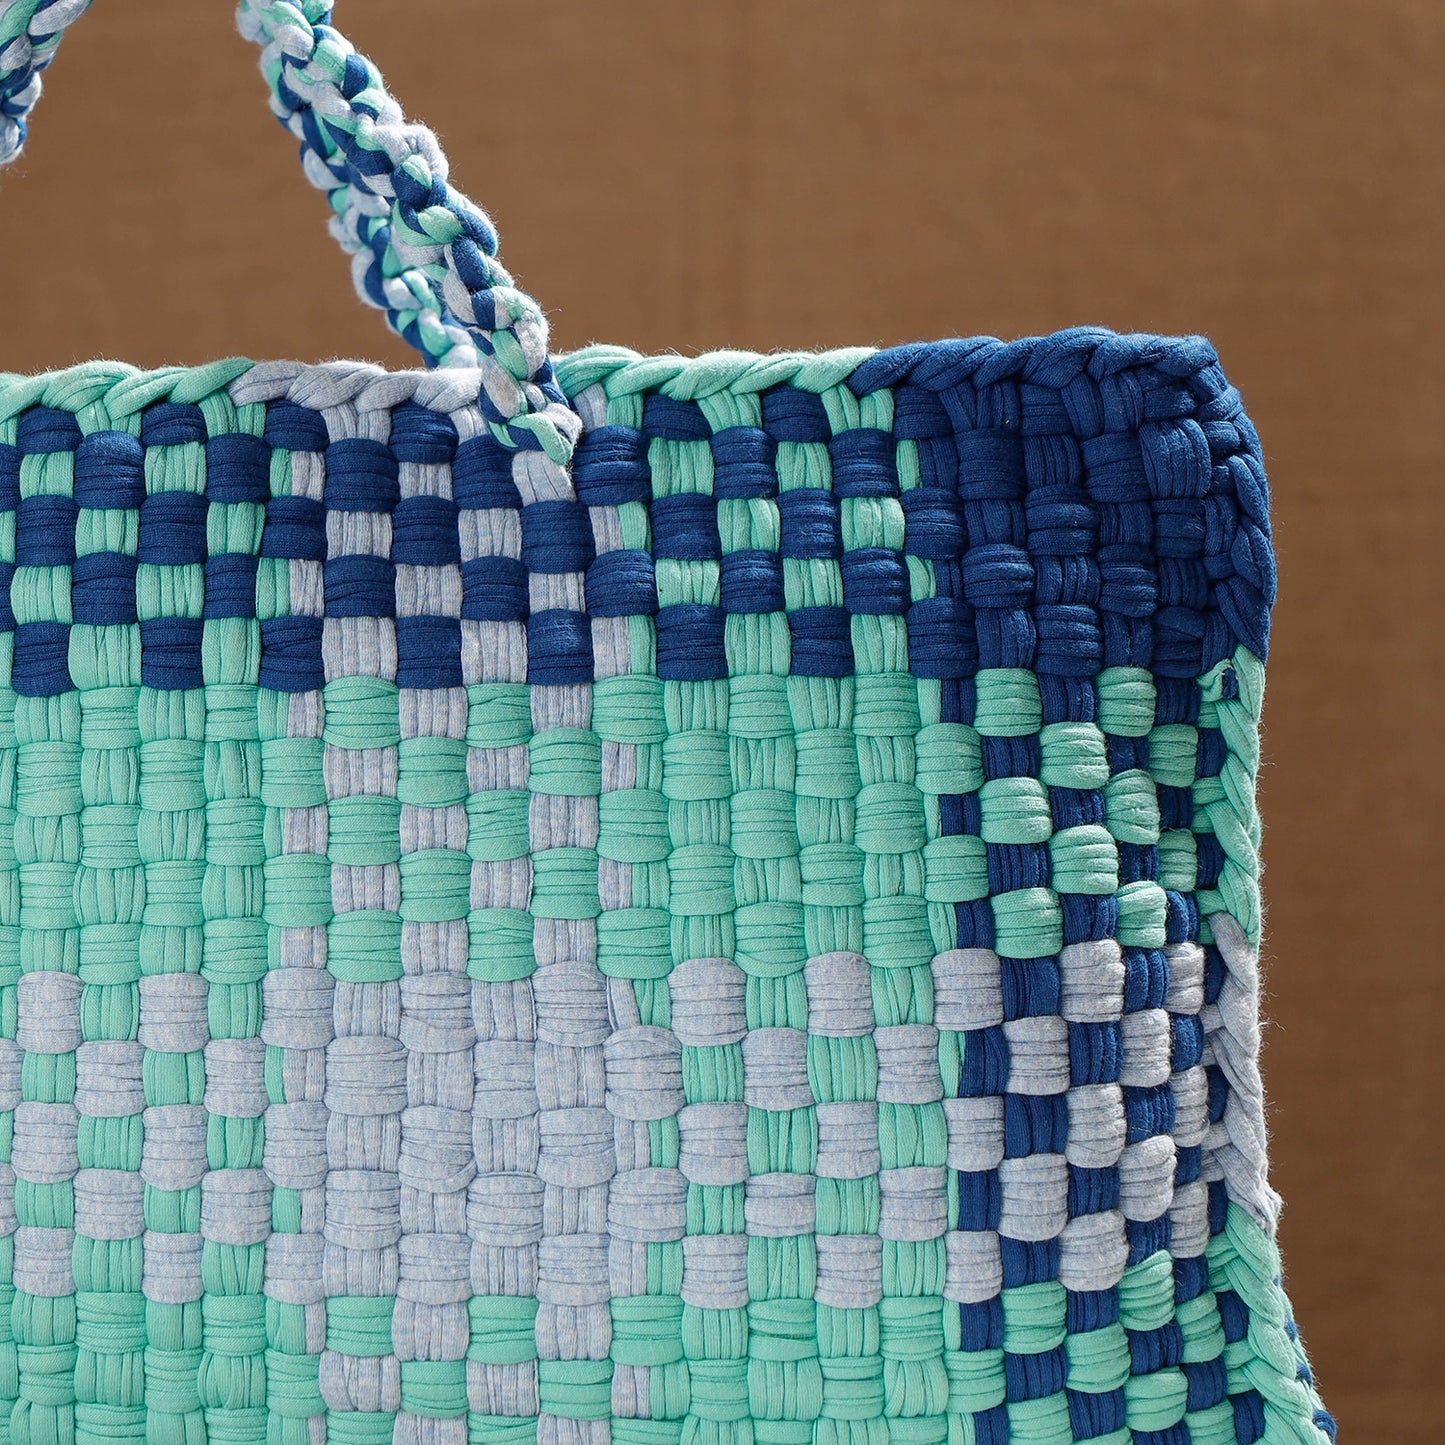 Handwoven Upcycled Cotton Laptop Bag (11 x 16 in)